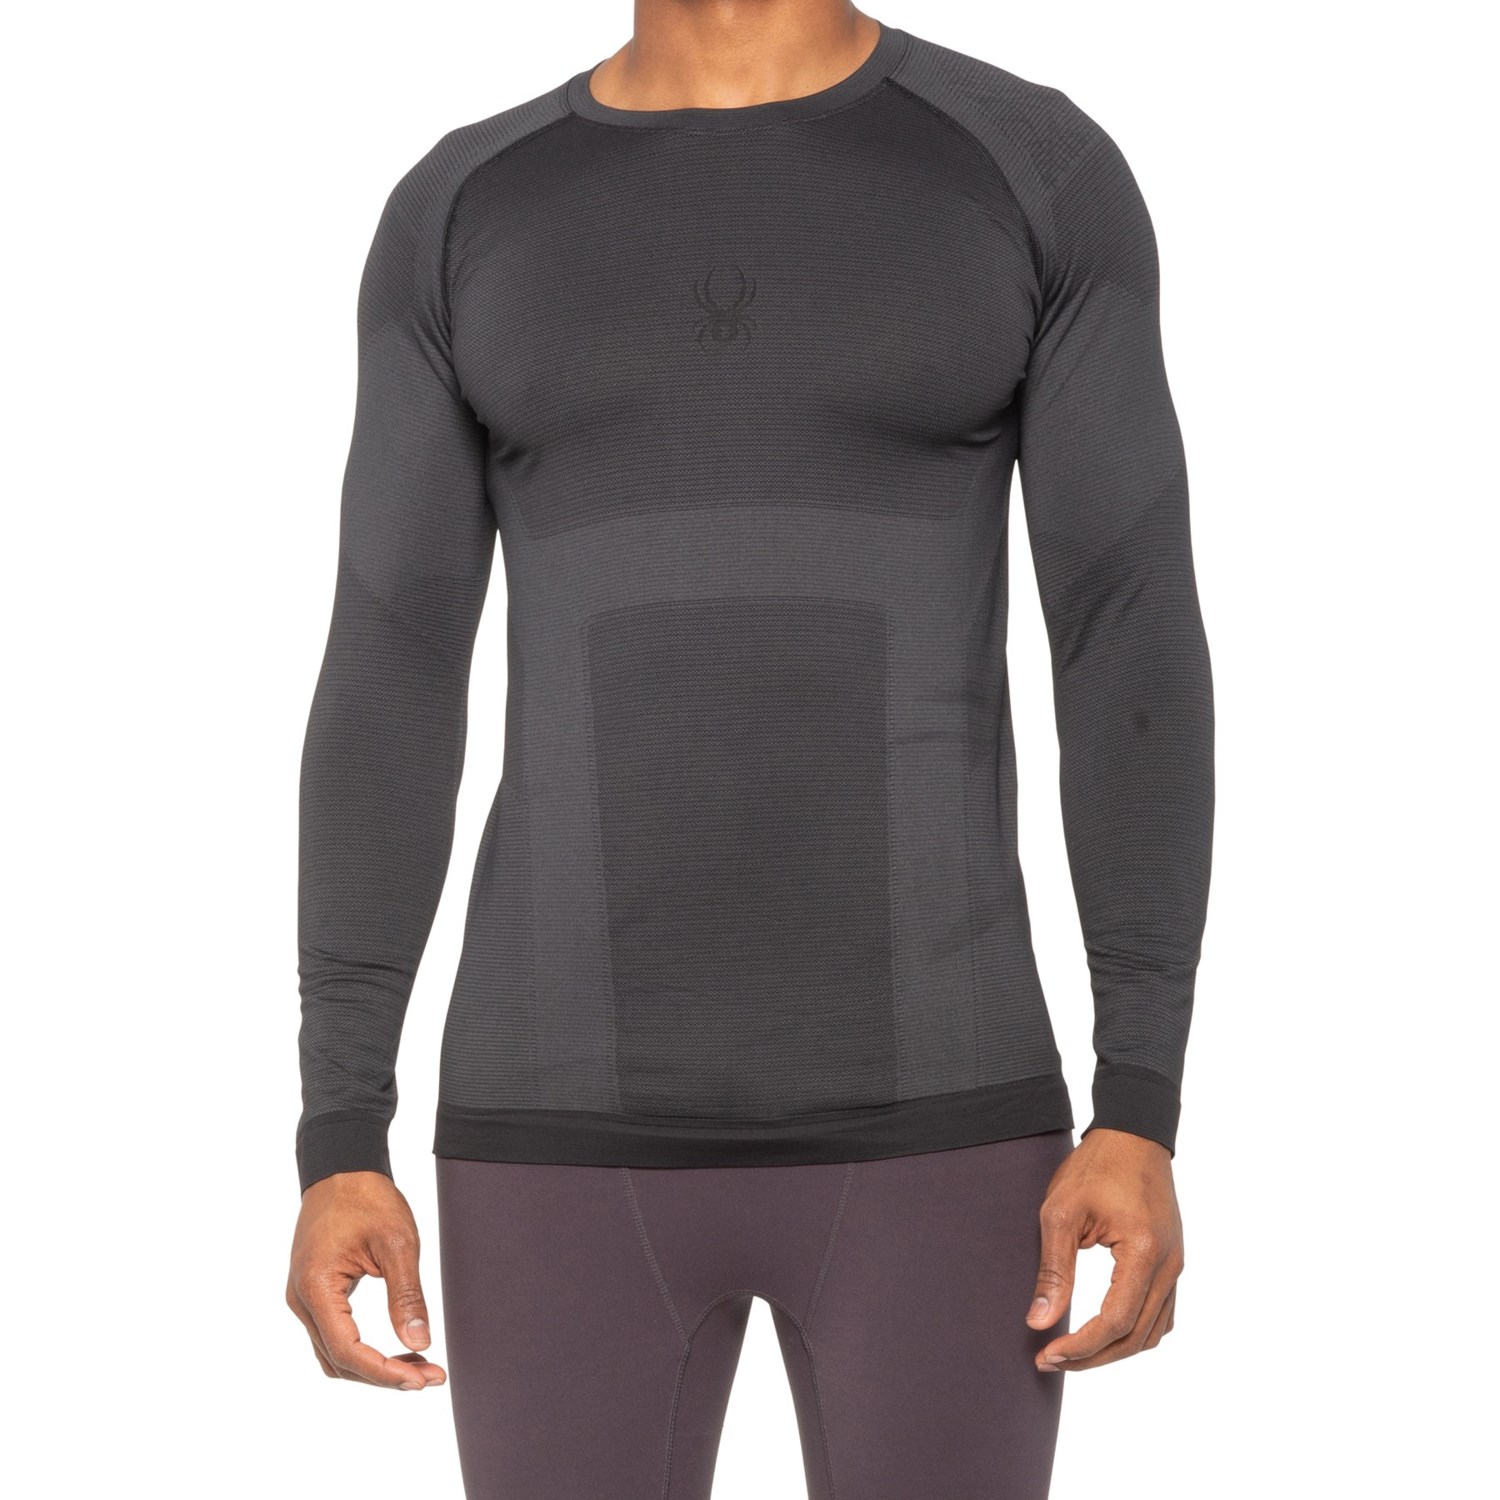 Details about   Barts Functional Shirt Base Layer Underwear Grey Insulating Long Sleeve 